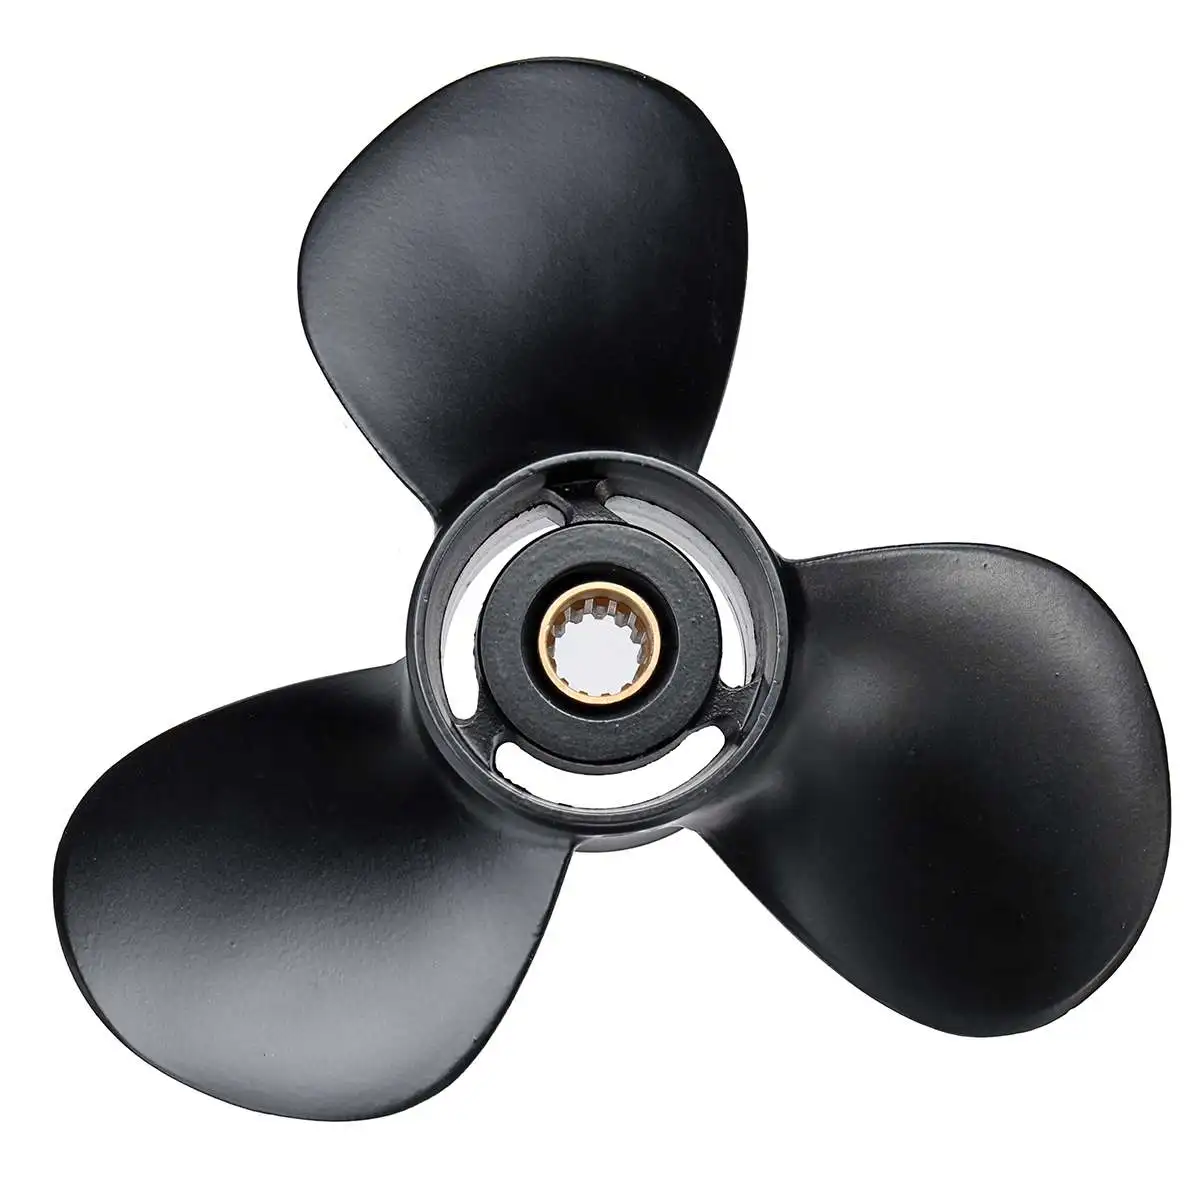 Aluminum Alloy Boat Outboard Propeller for Suzuki 35-65HP 3 Blades 13 Spline Tooths R Rotation 58100-94313-019 11 1/2 x 13 Inch